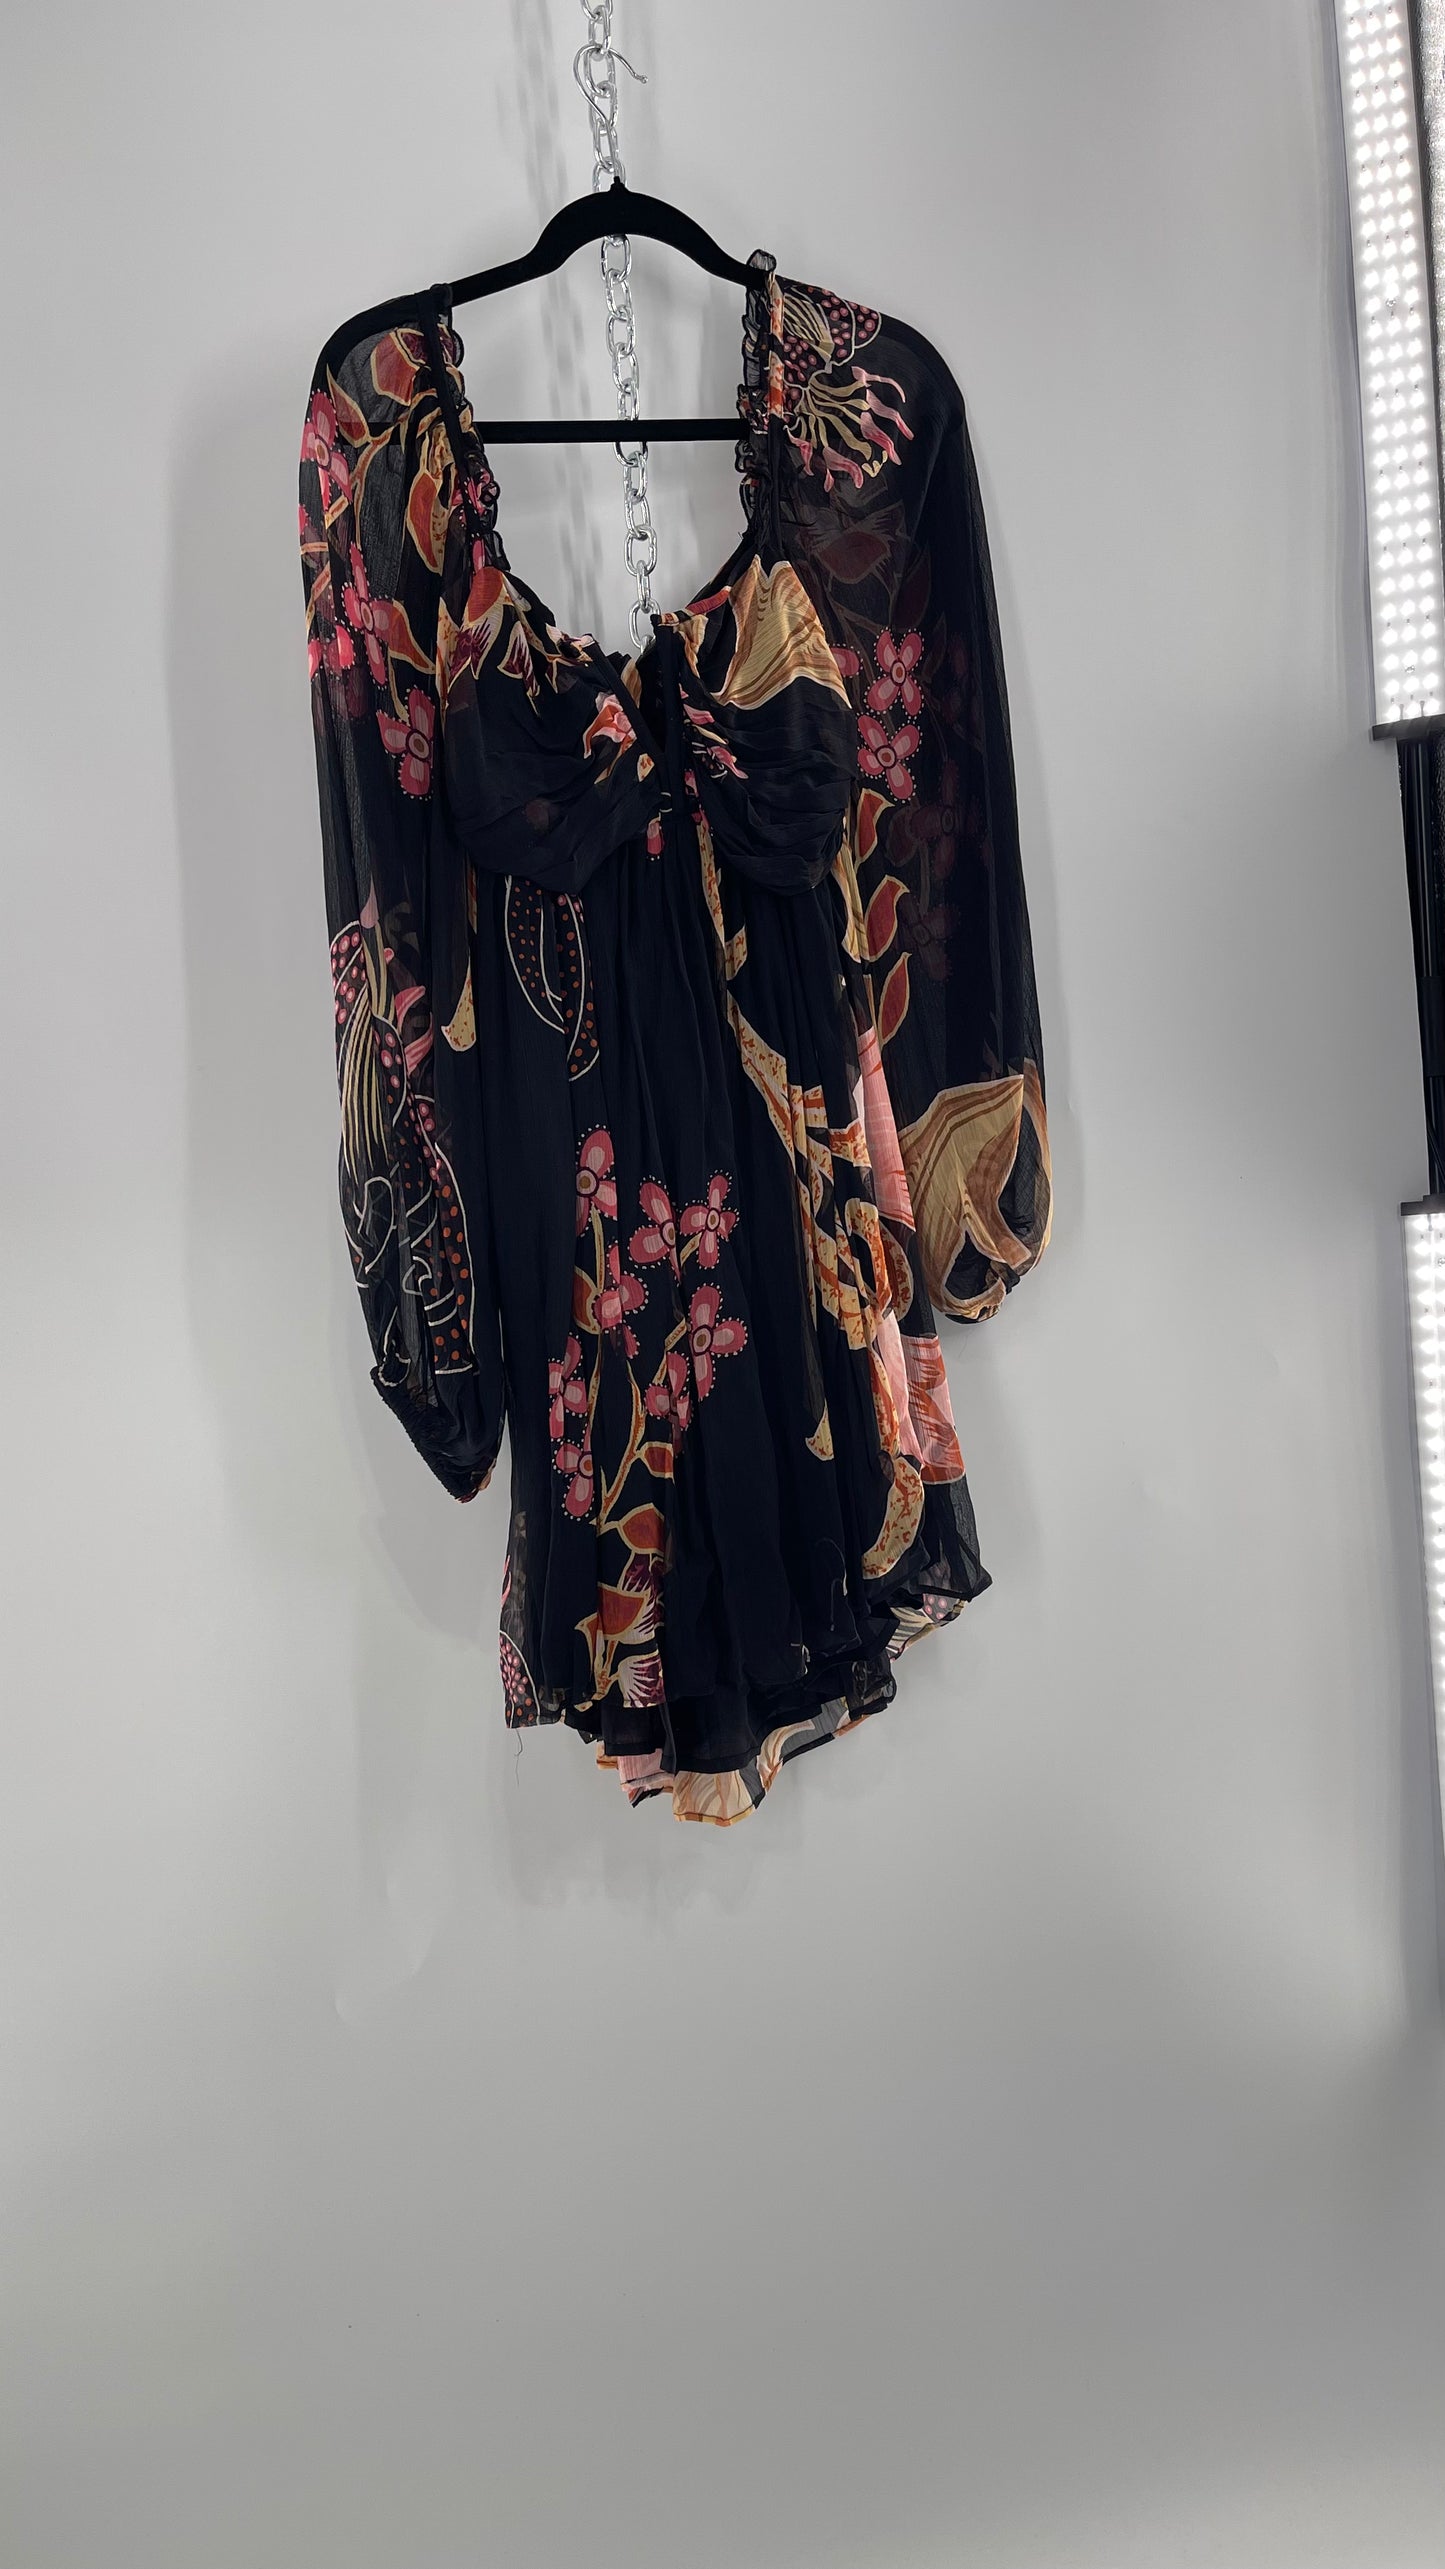 Anthropologie Let Me Be Crimped Black Chiffon Pink Floral Patterned l Dress with Tie/Open Back Detail and Tags Attached (Small)